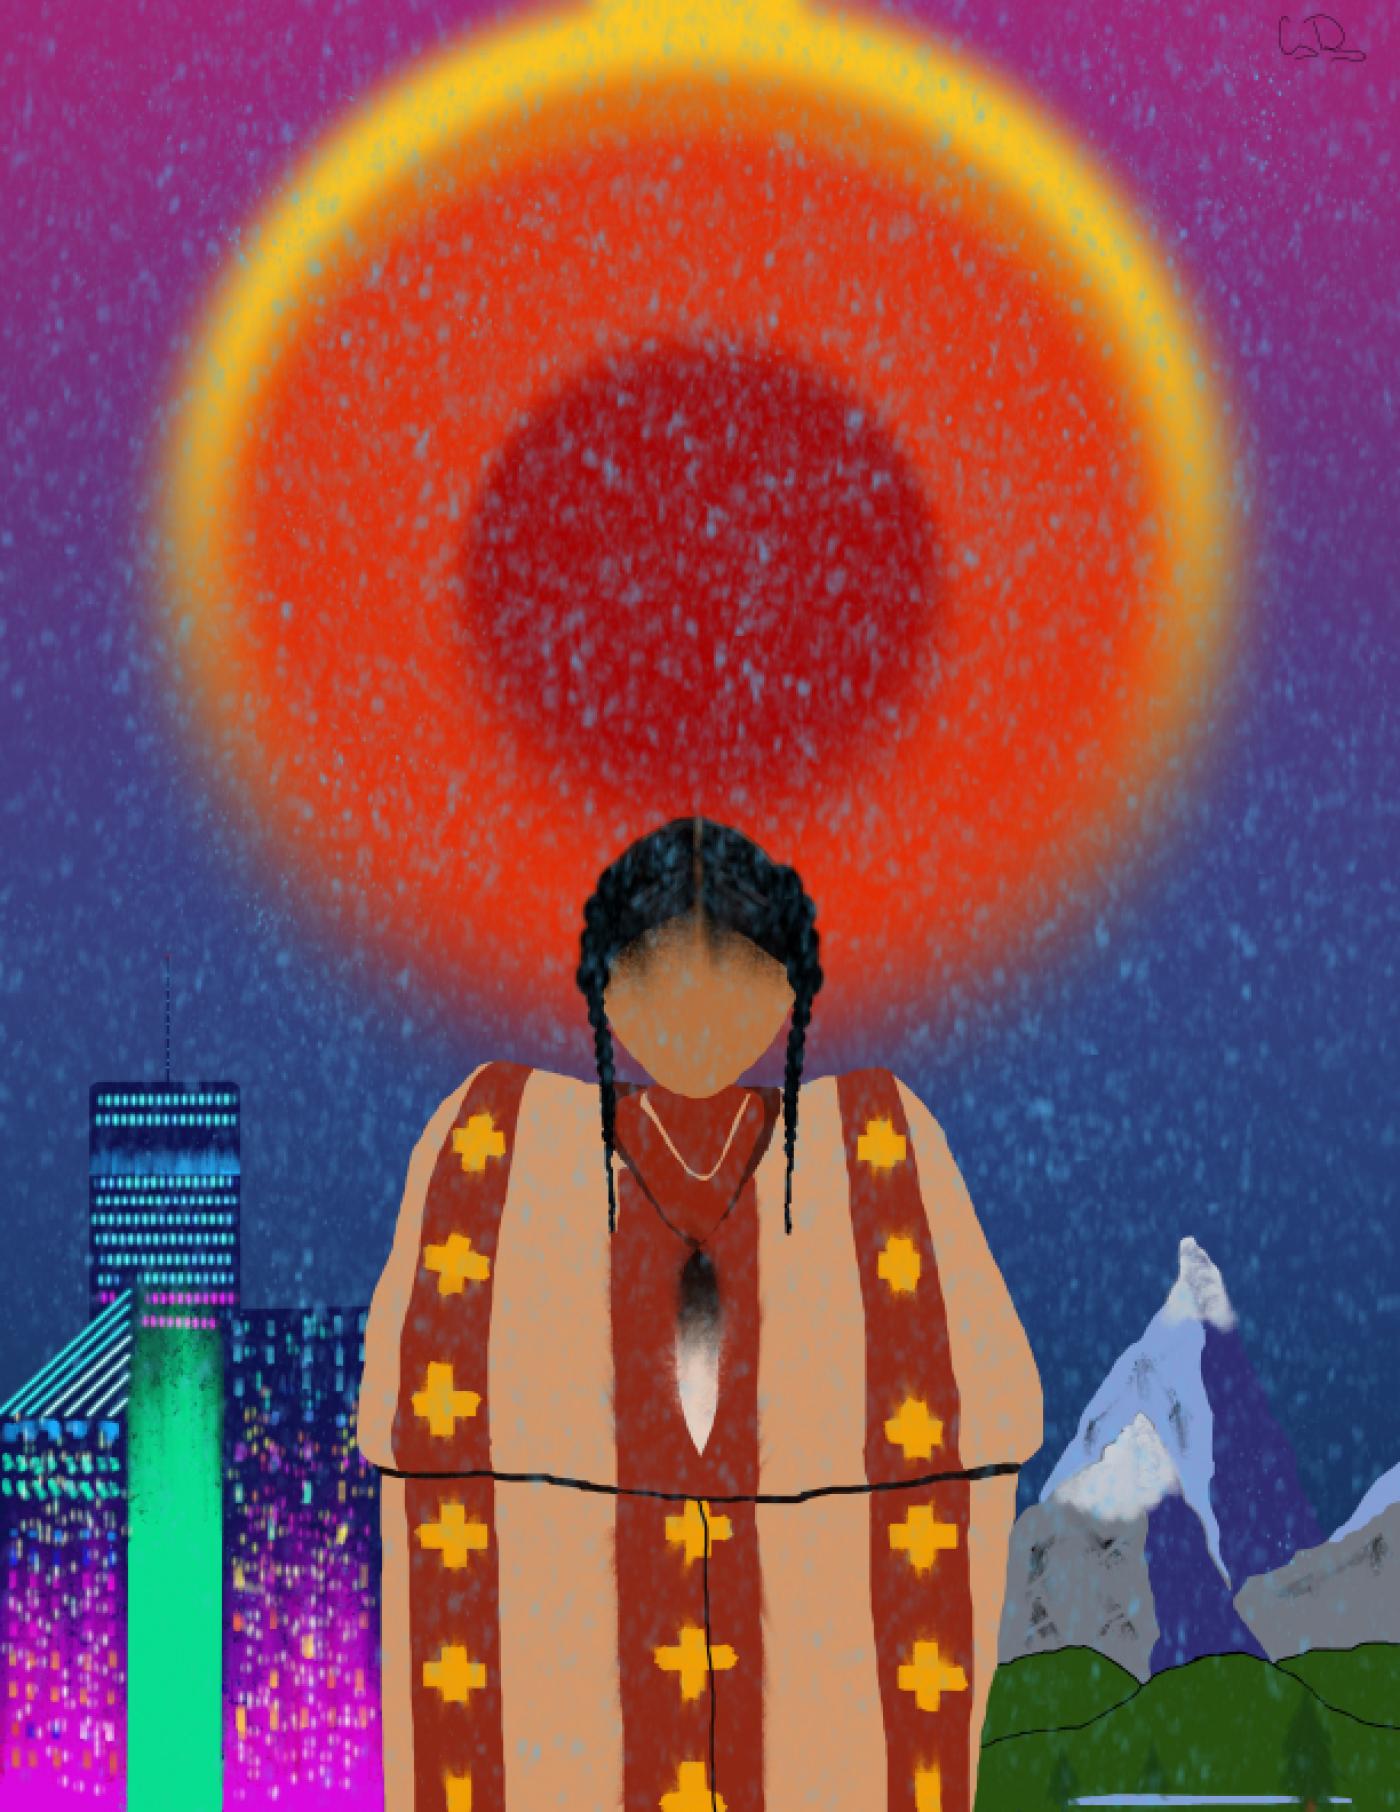 Digital image depicting a faceless Indigenous person in the middle wearing traditional dress. Rain falls in the foreground while a bright sun hangs overhead. Behind the central figure on the left are skyscrapers, with mountains and green hills on the right.